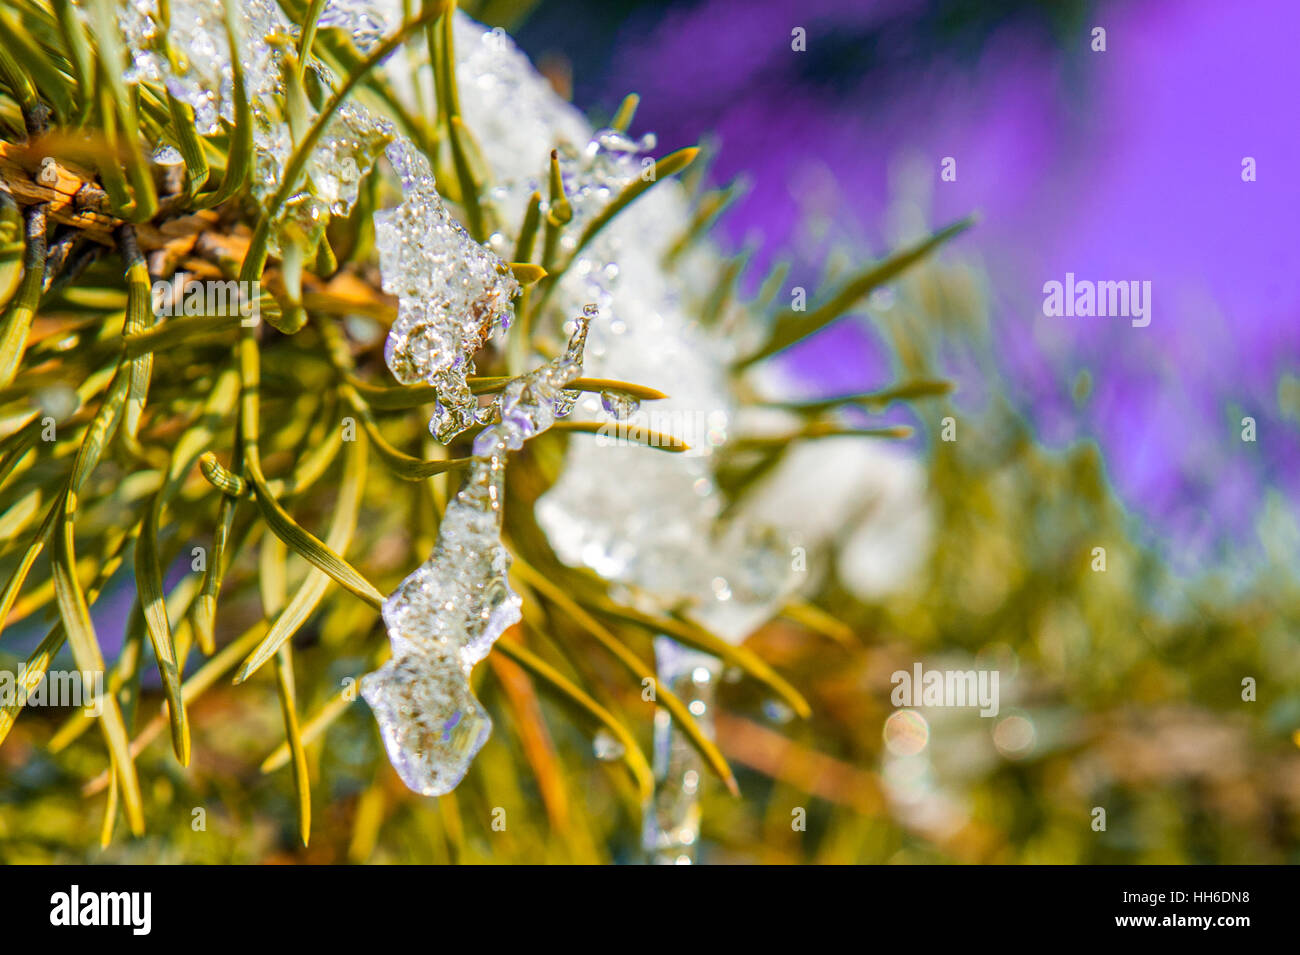 View of pine branch with snow and icicle Stock Photo